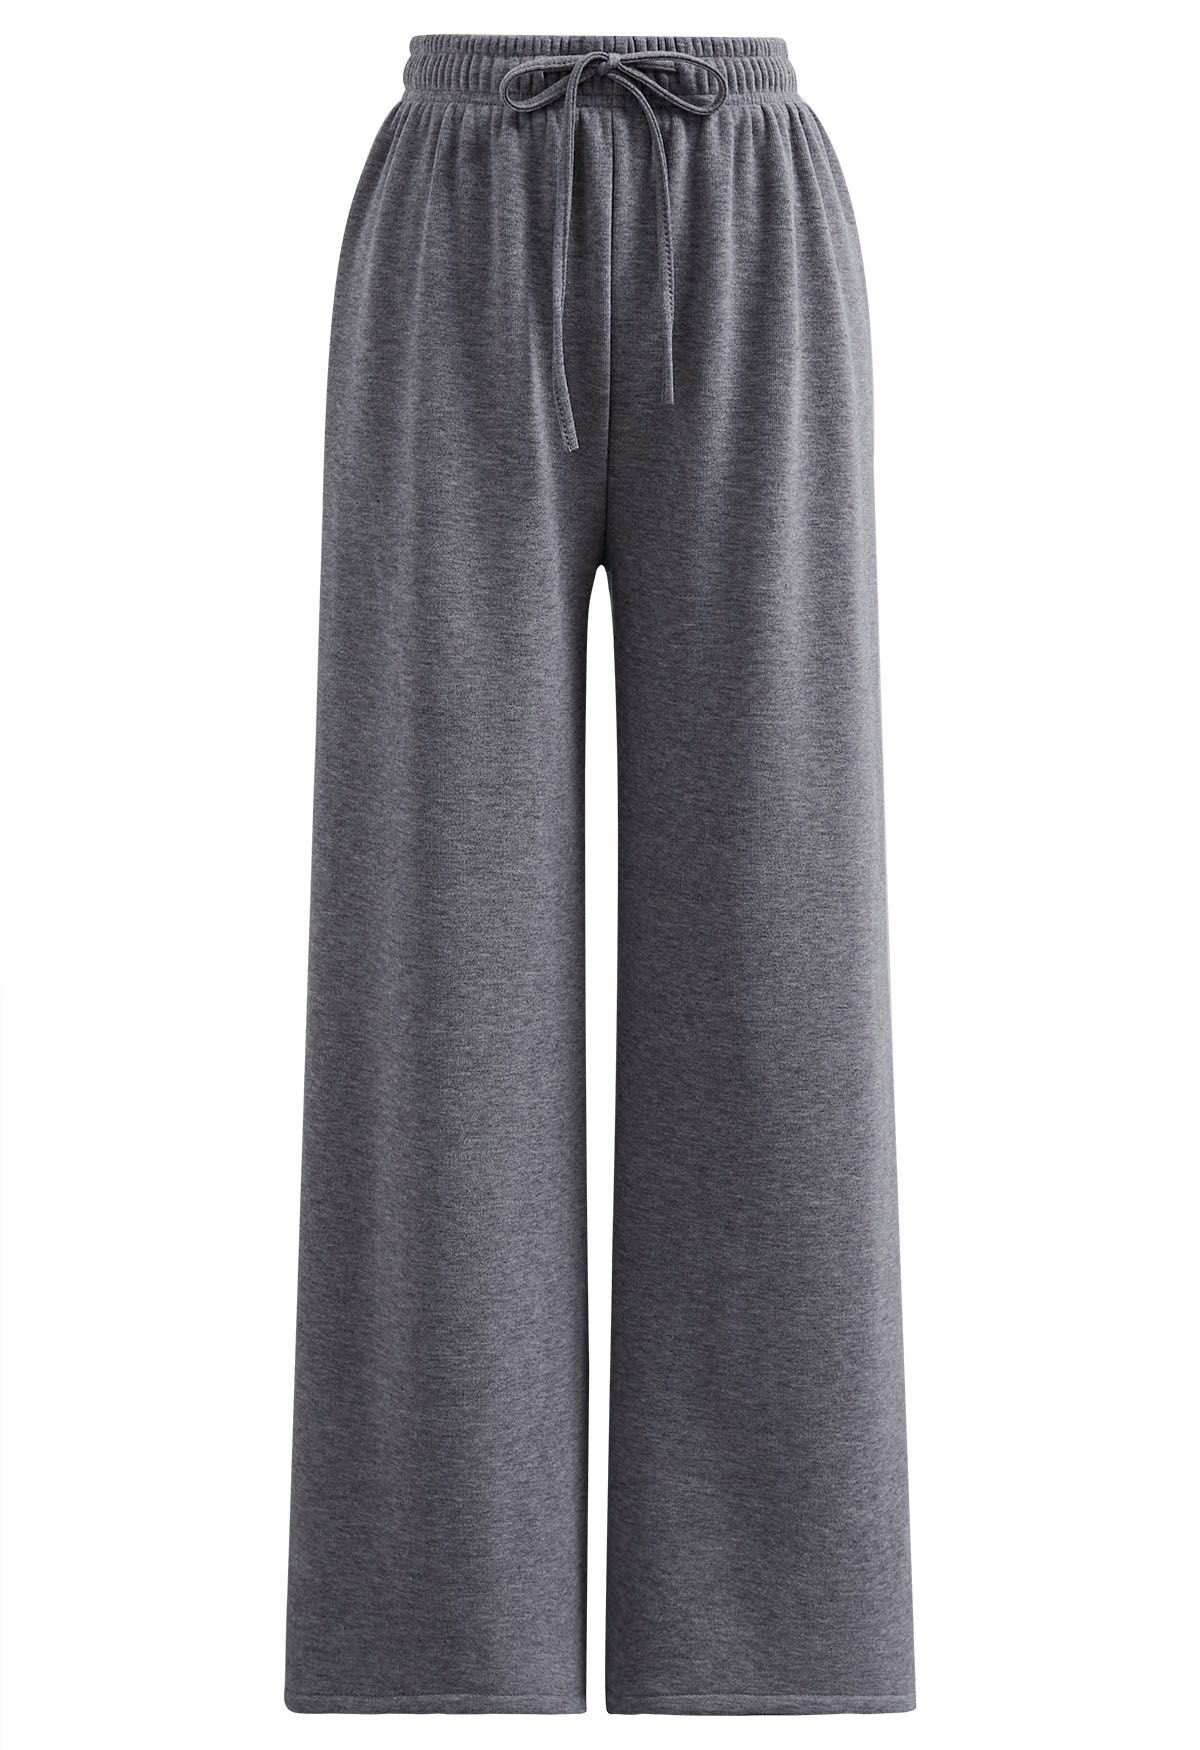 Velvet Lining Cozy Lounge Pants in Grey - Retro, Indie and Unique Fashion